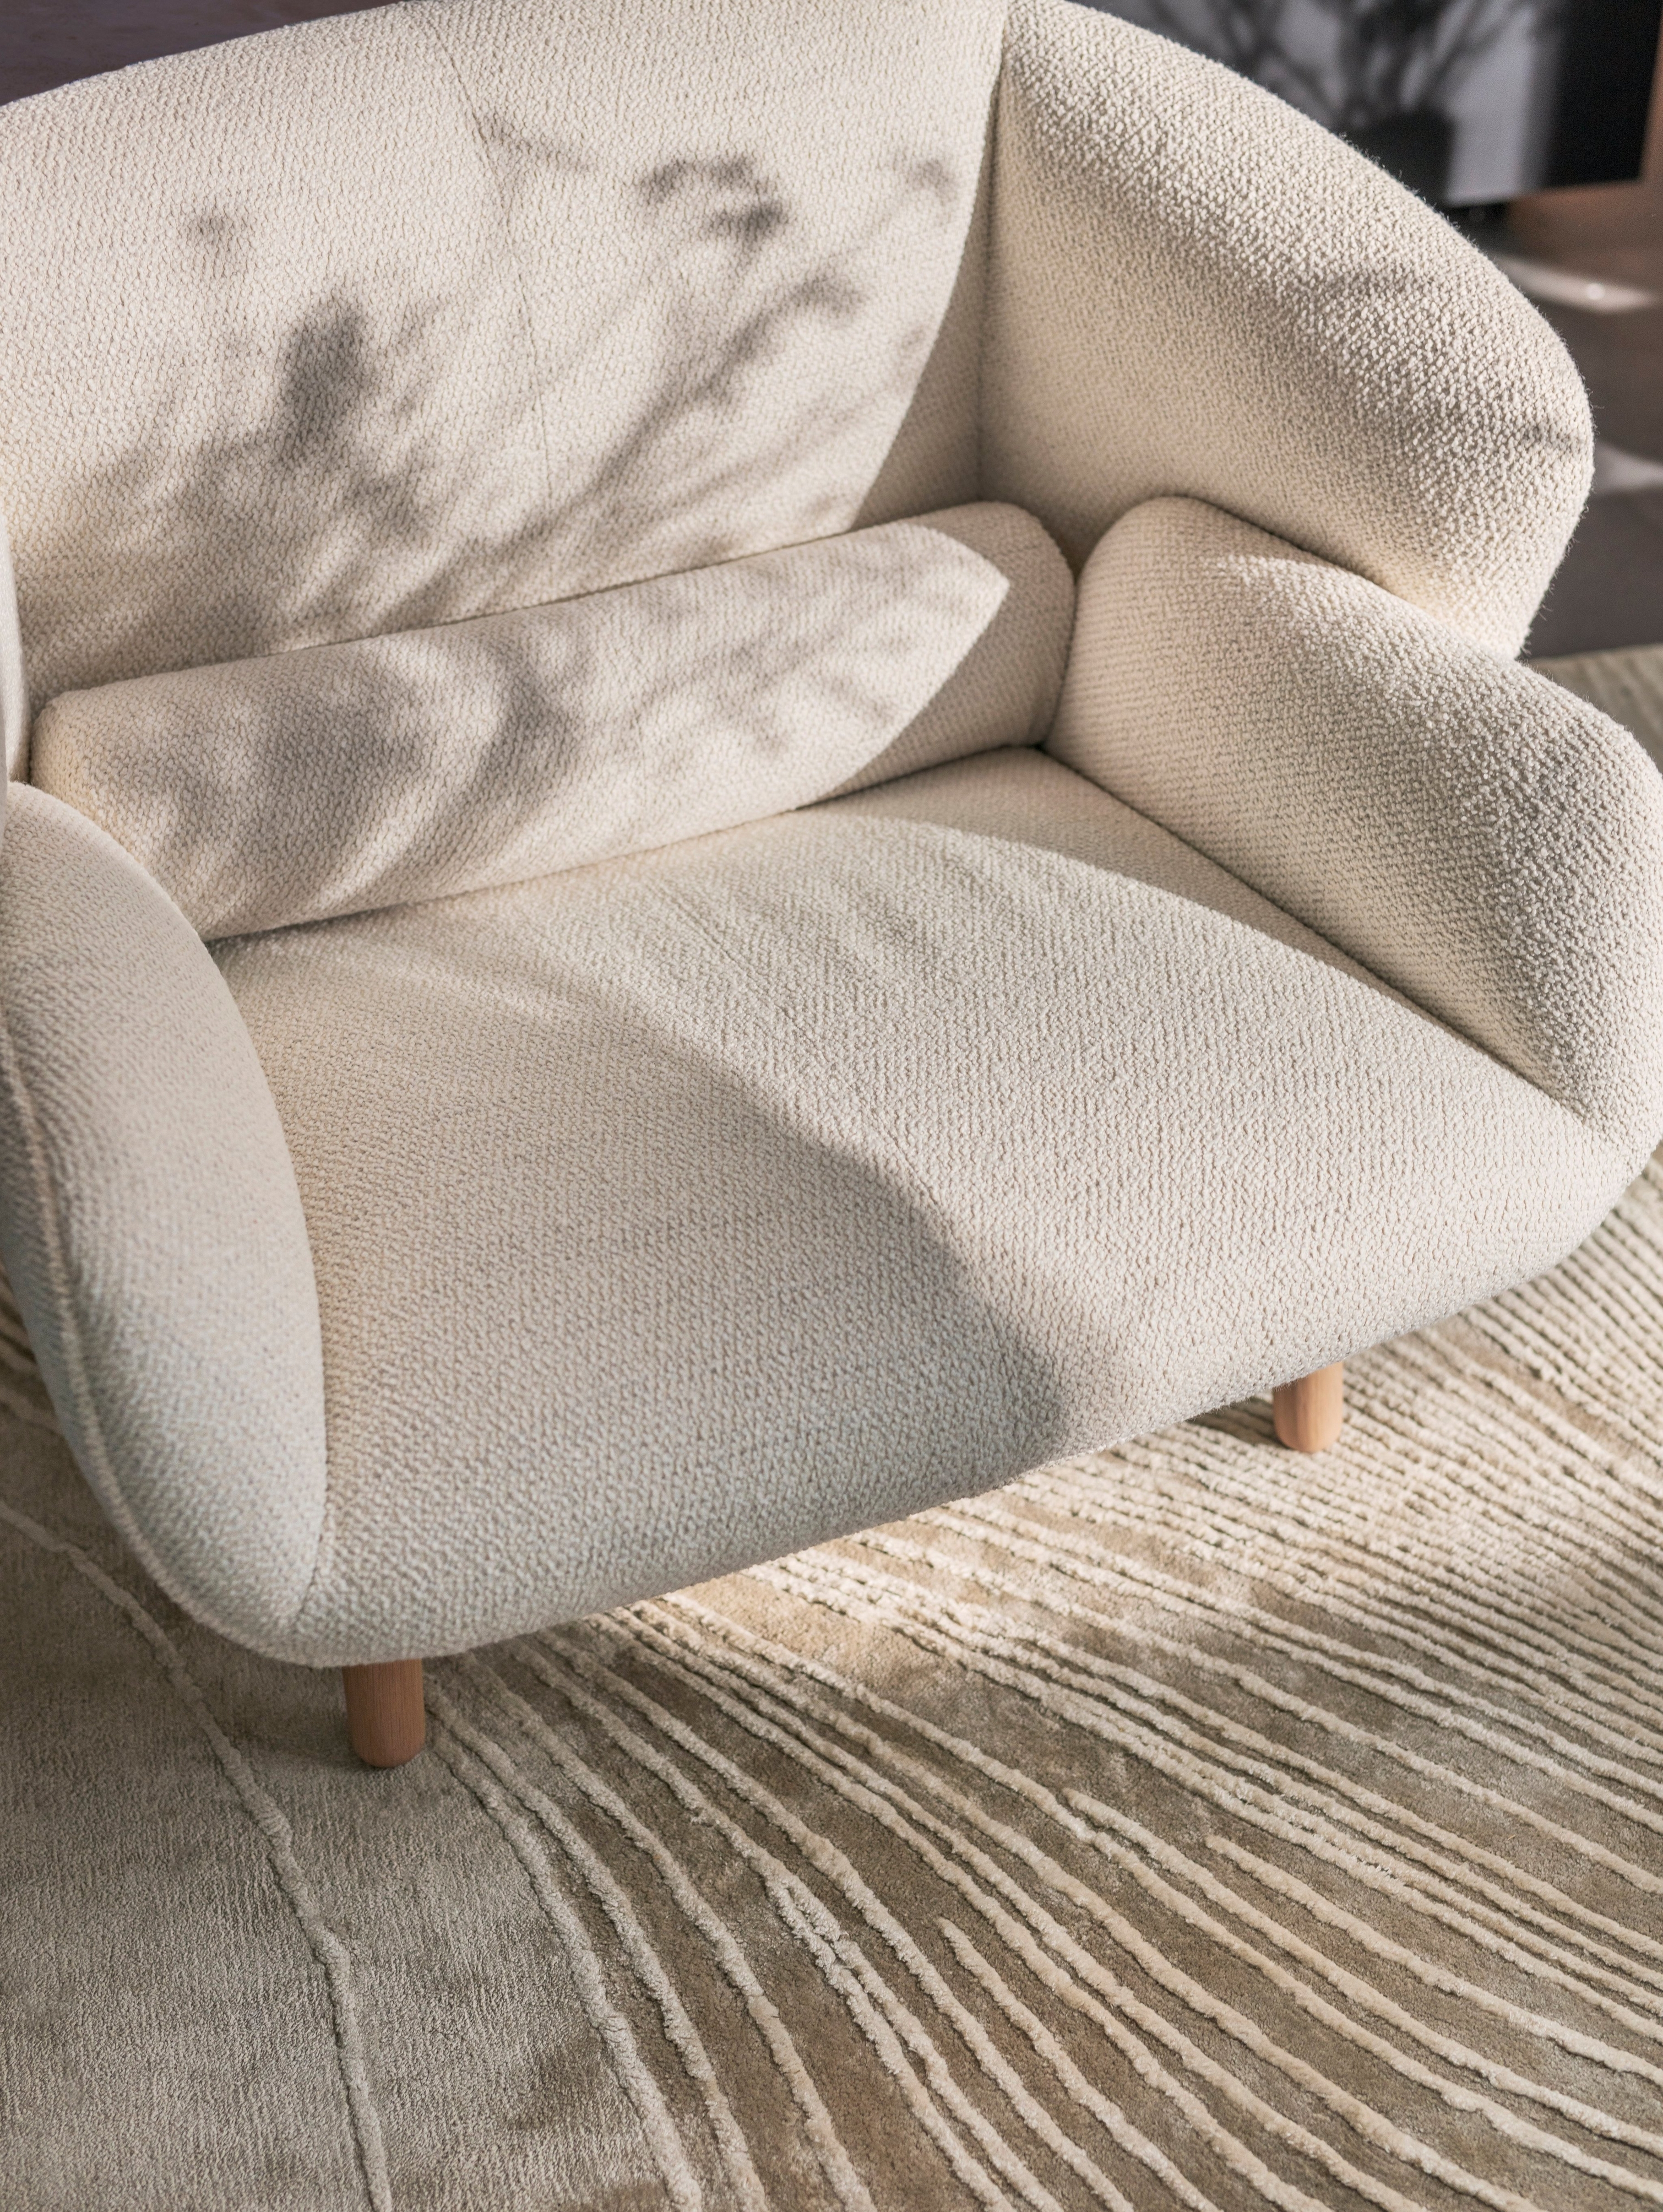 The Fusion armchair in white Lazio fabric styled with the Tide rug in gray/white